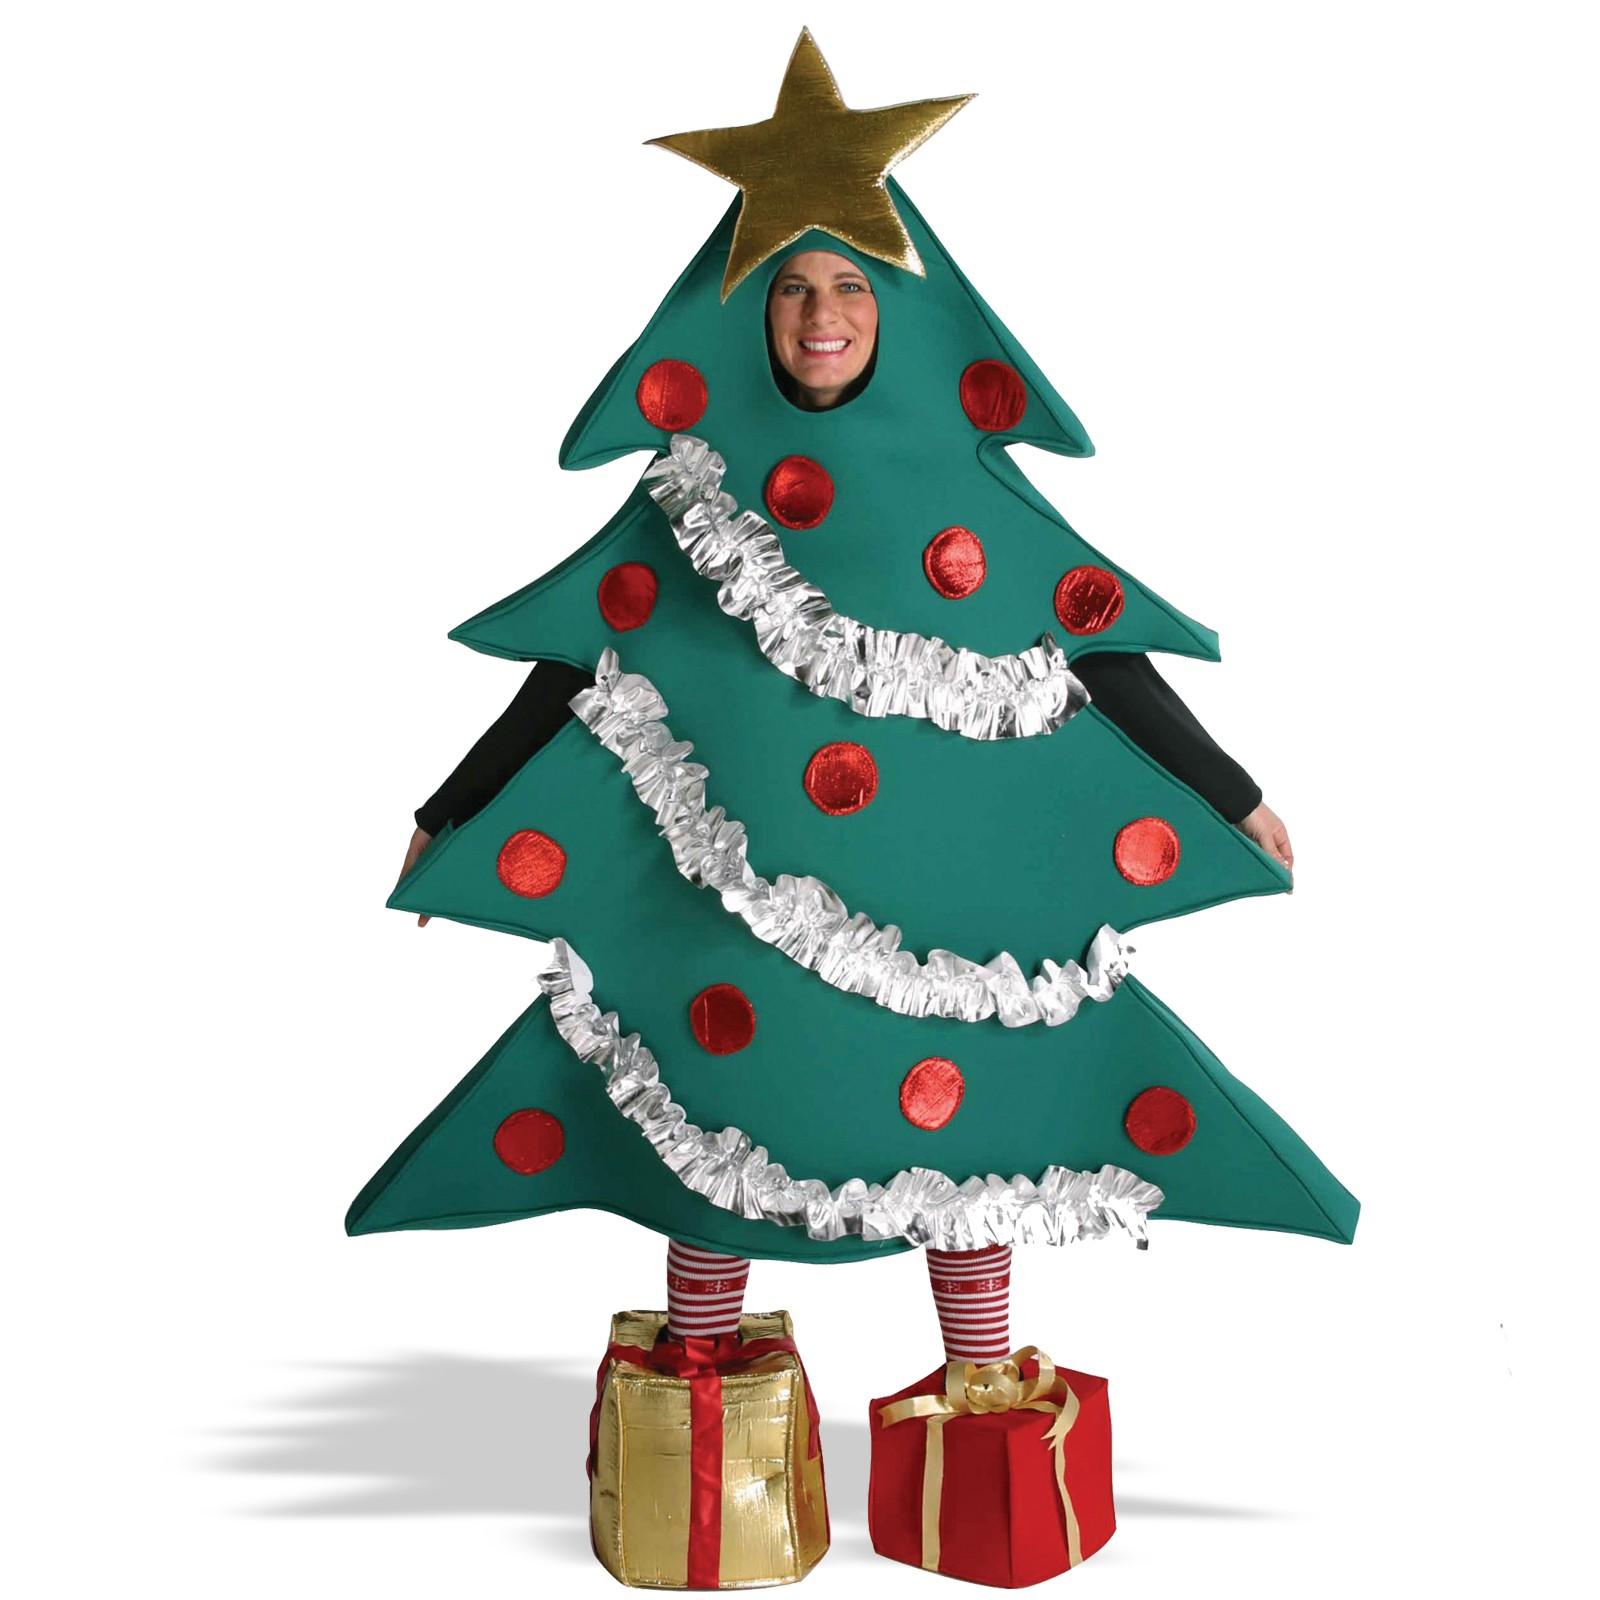 http://koffkindom.ru/wp-content/uploads/2016/08/christmas-tree-with-shoe-boxes-adult-costume.jpg